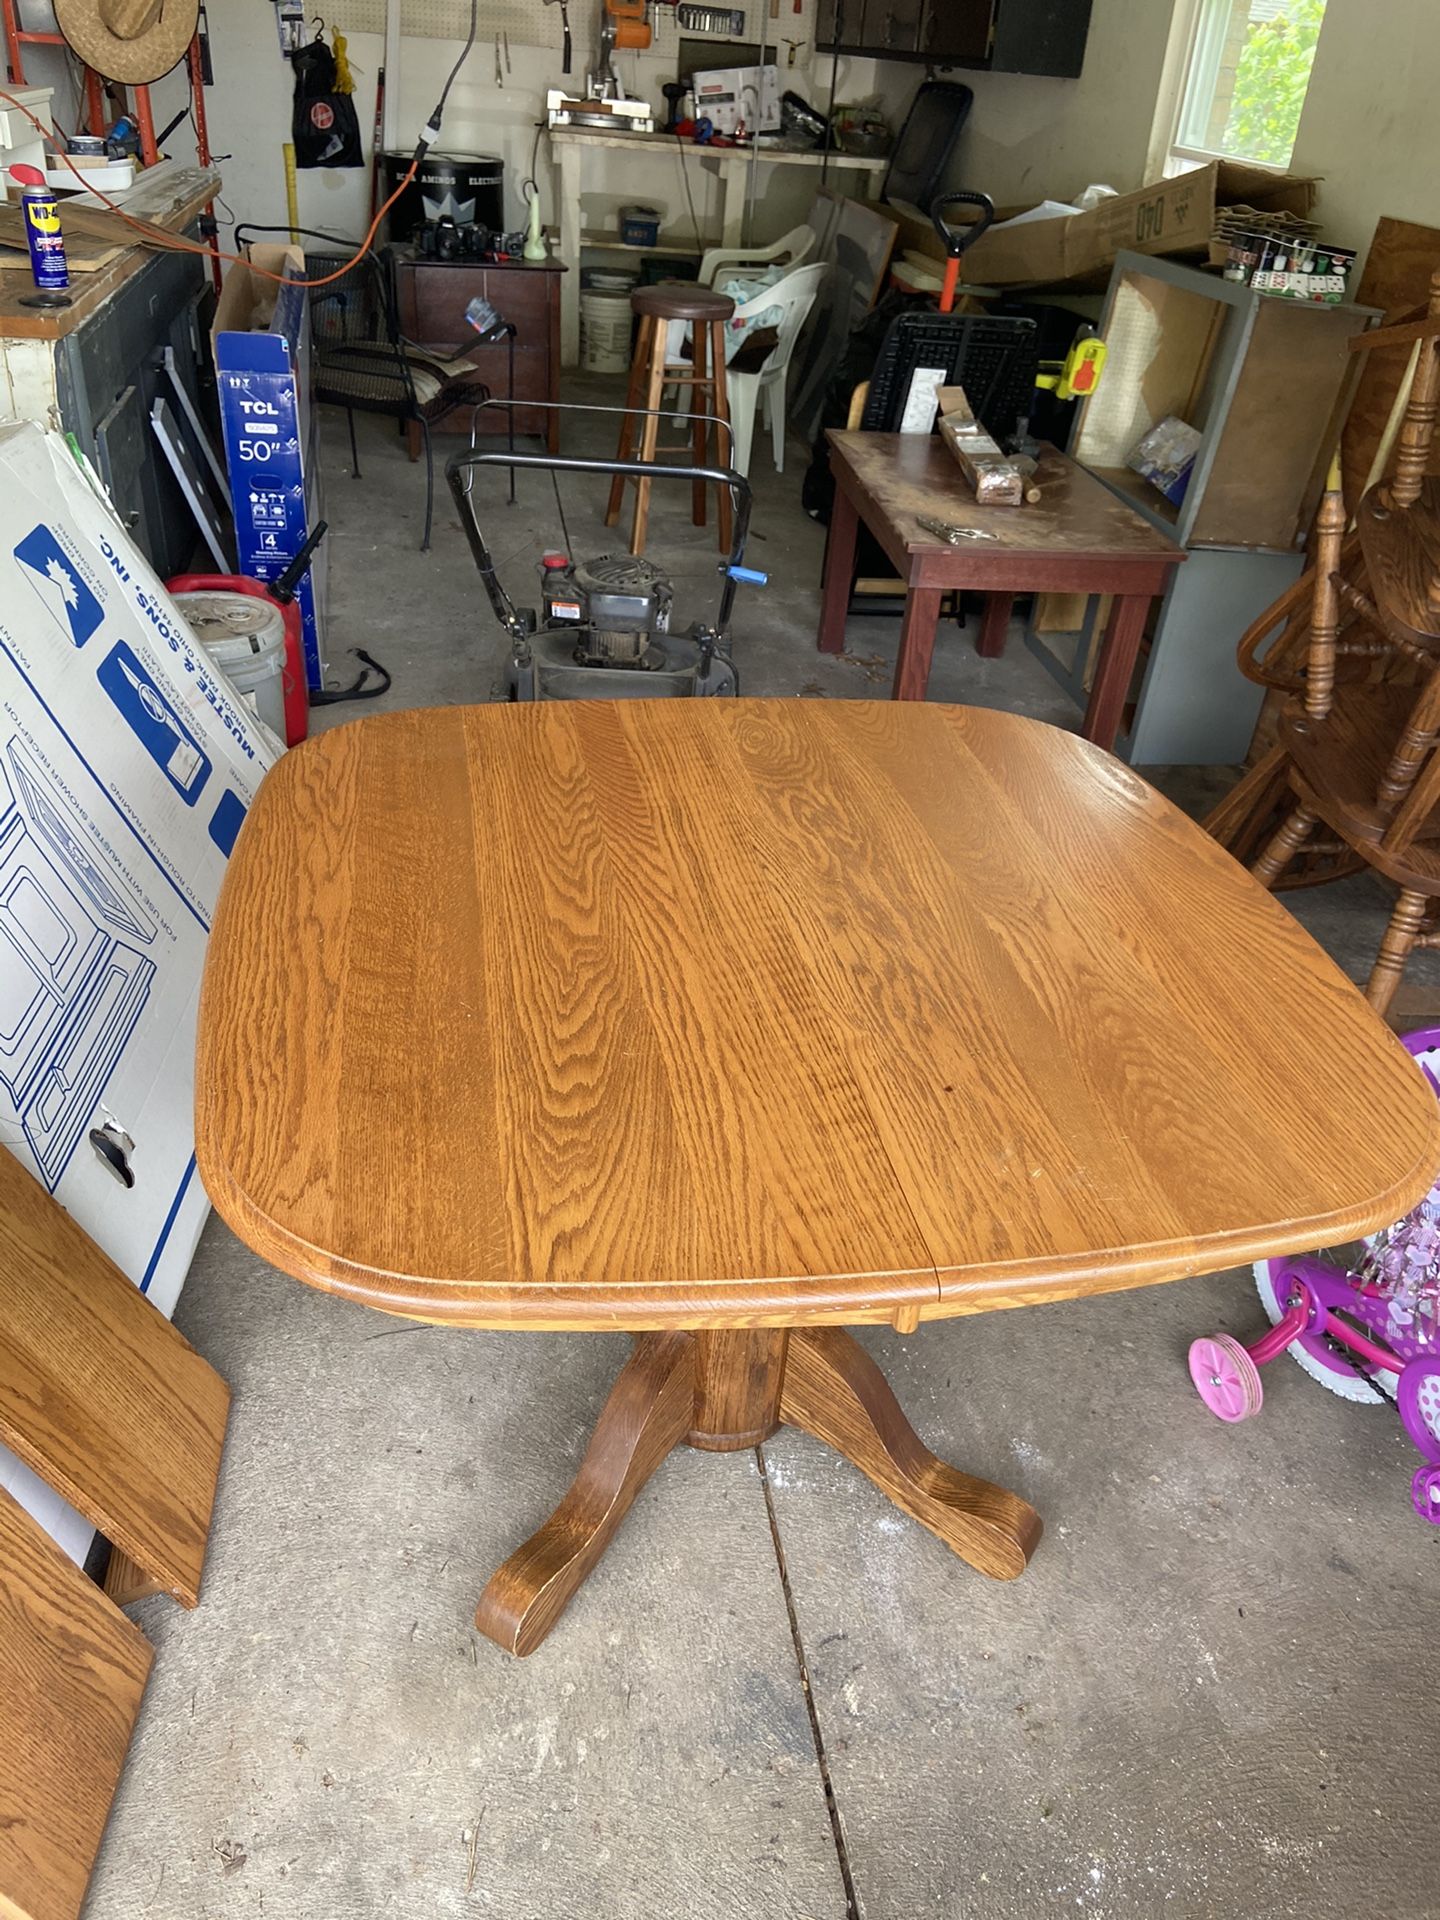 Wood dining table with 4 chairs 2 leaves